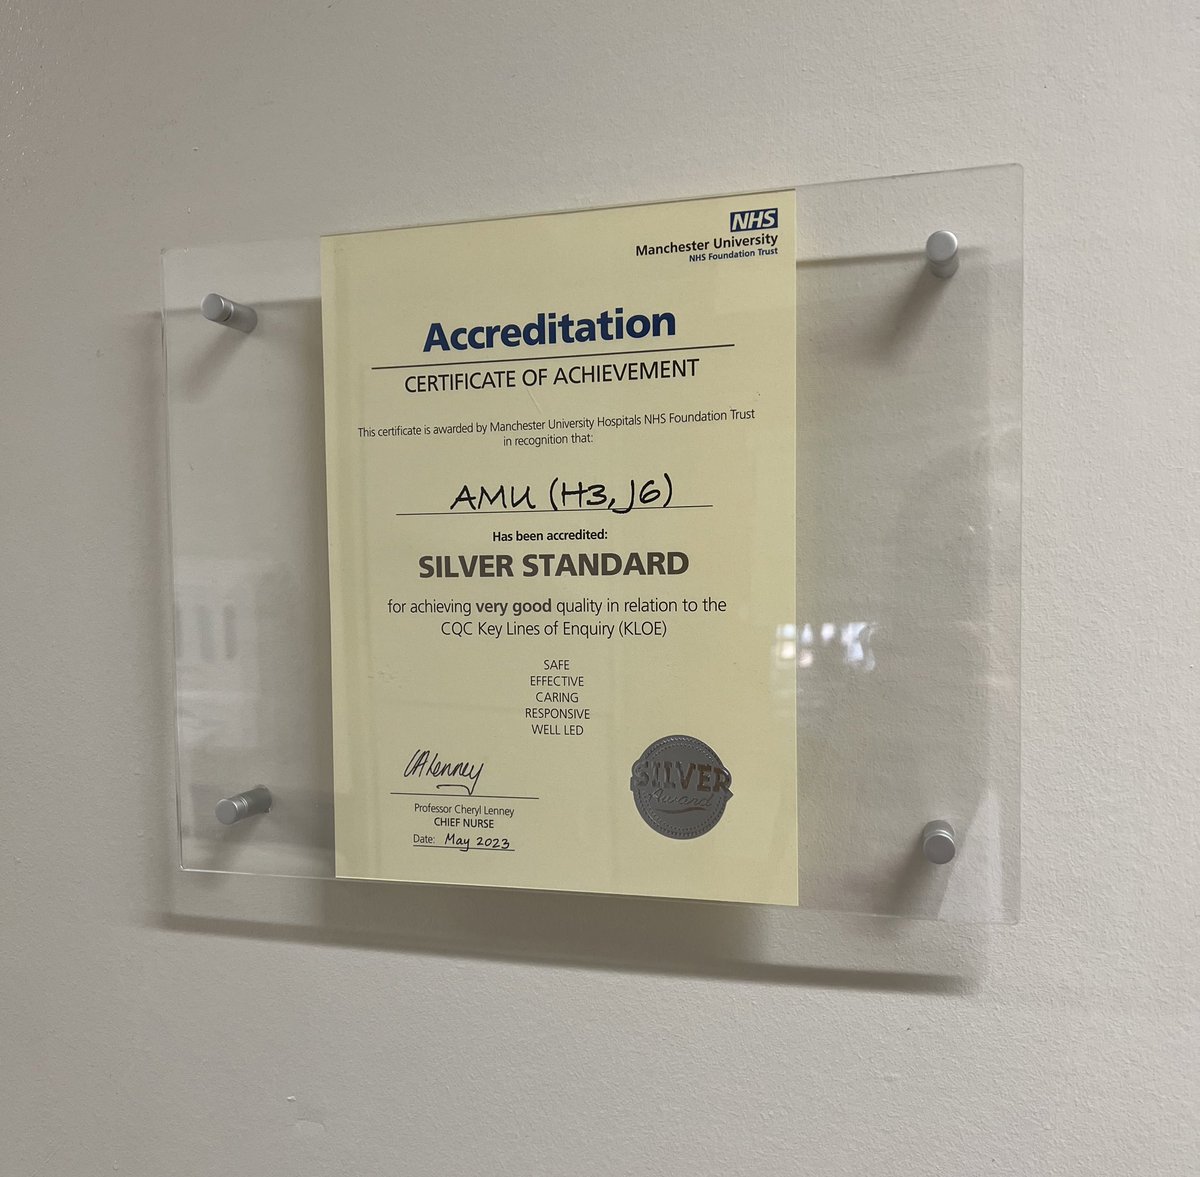 SHES UP! Our SILVER Accreditation Certificate✨ @MFT_QIT @MFTnhs @NorthMcrGH_NHS 

#goingforgold #theonlywayisup